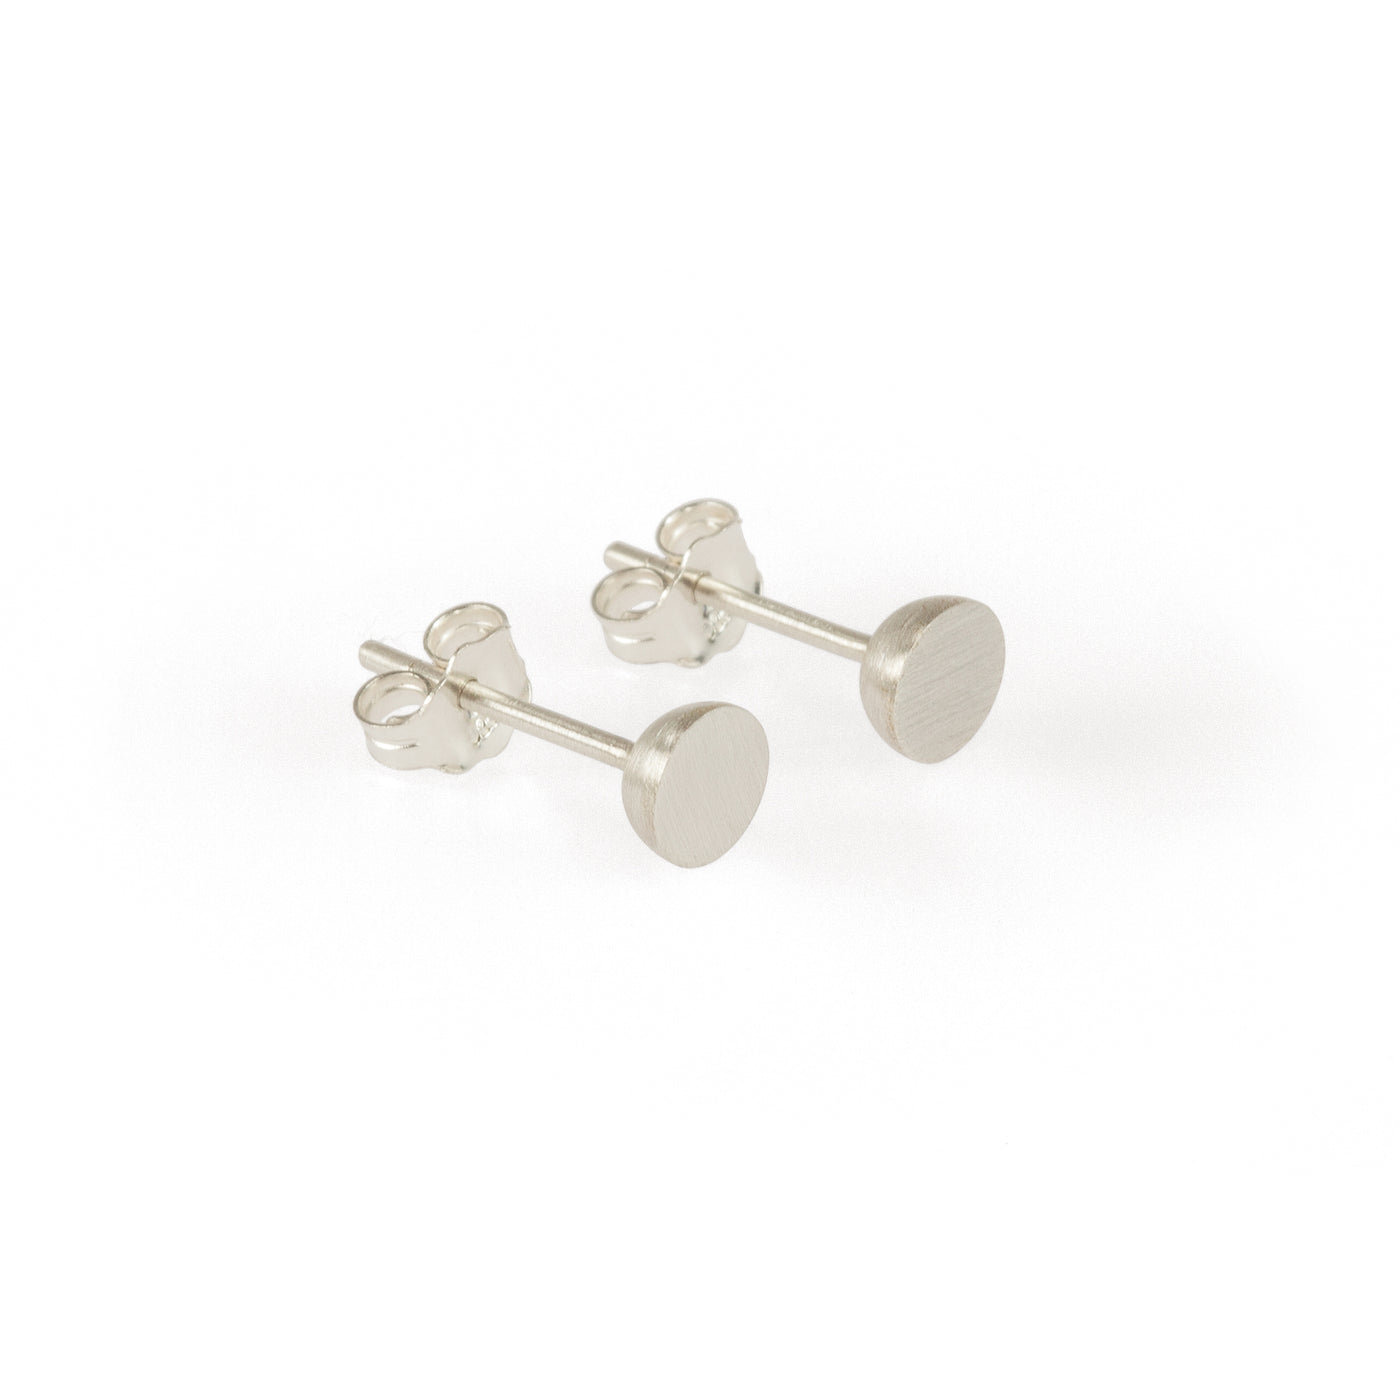 Ethical silver earrings. These minimalist 5mm Hemisphere Studs are handmade in Cape Town in recycled silver from e-waste.